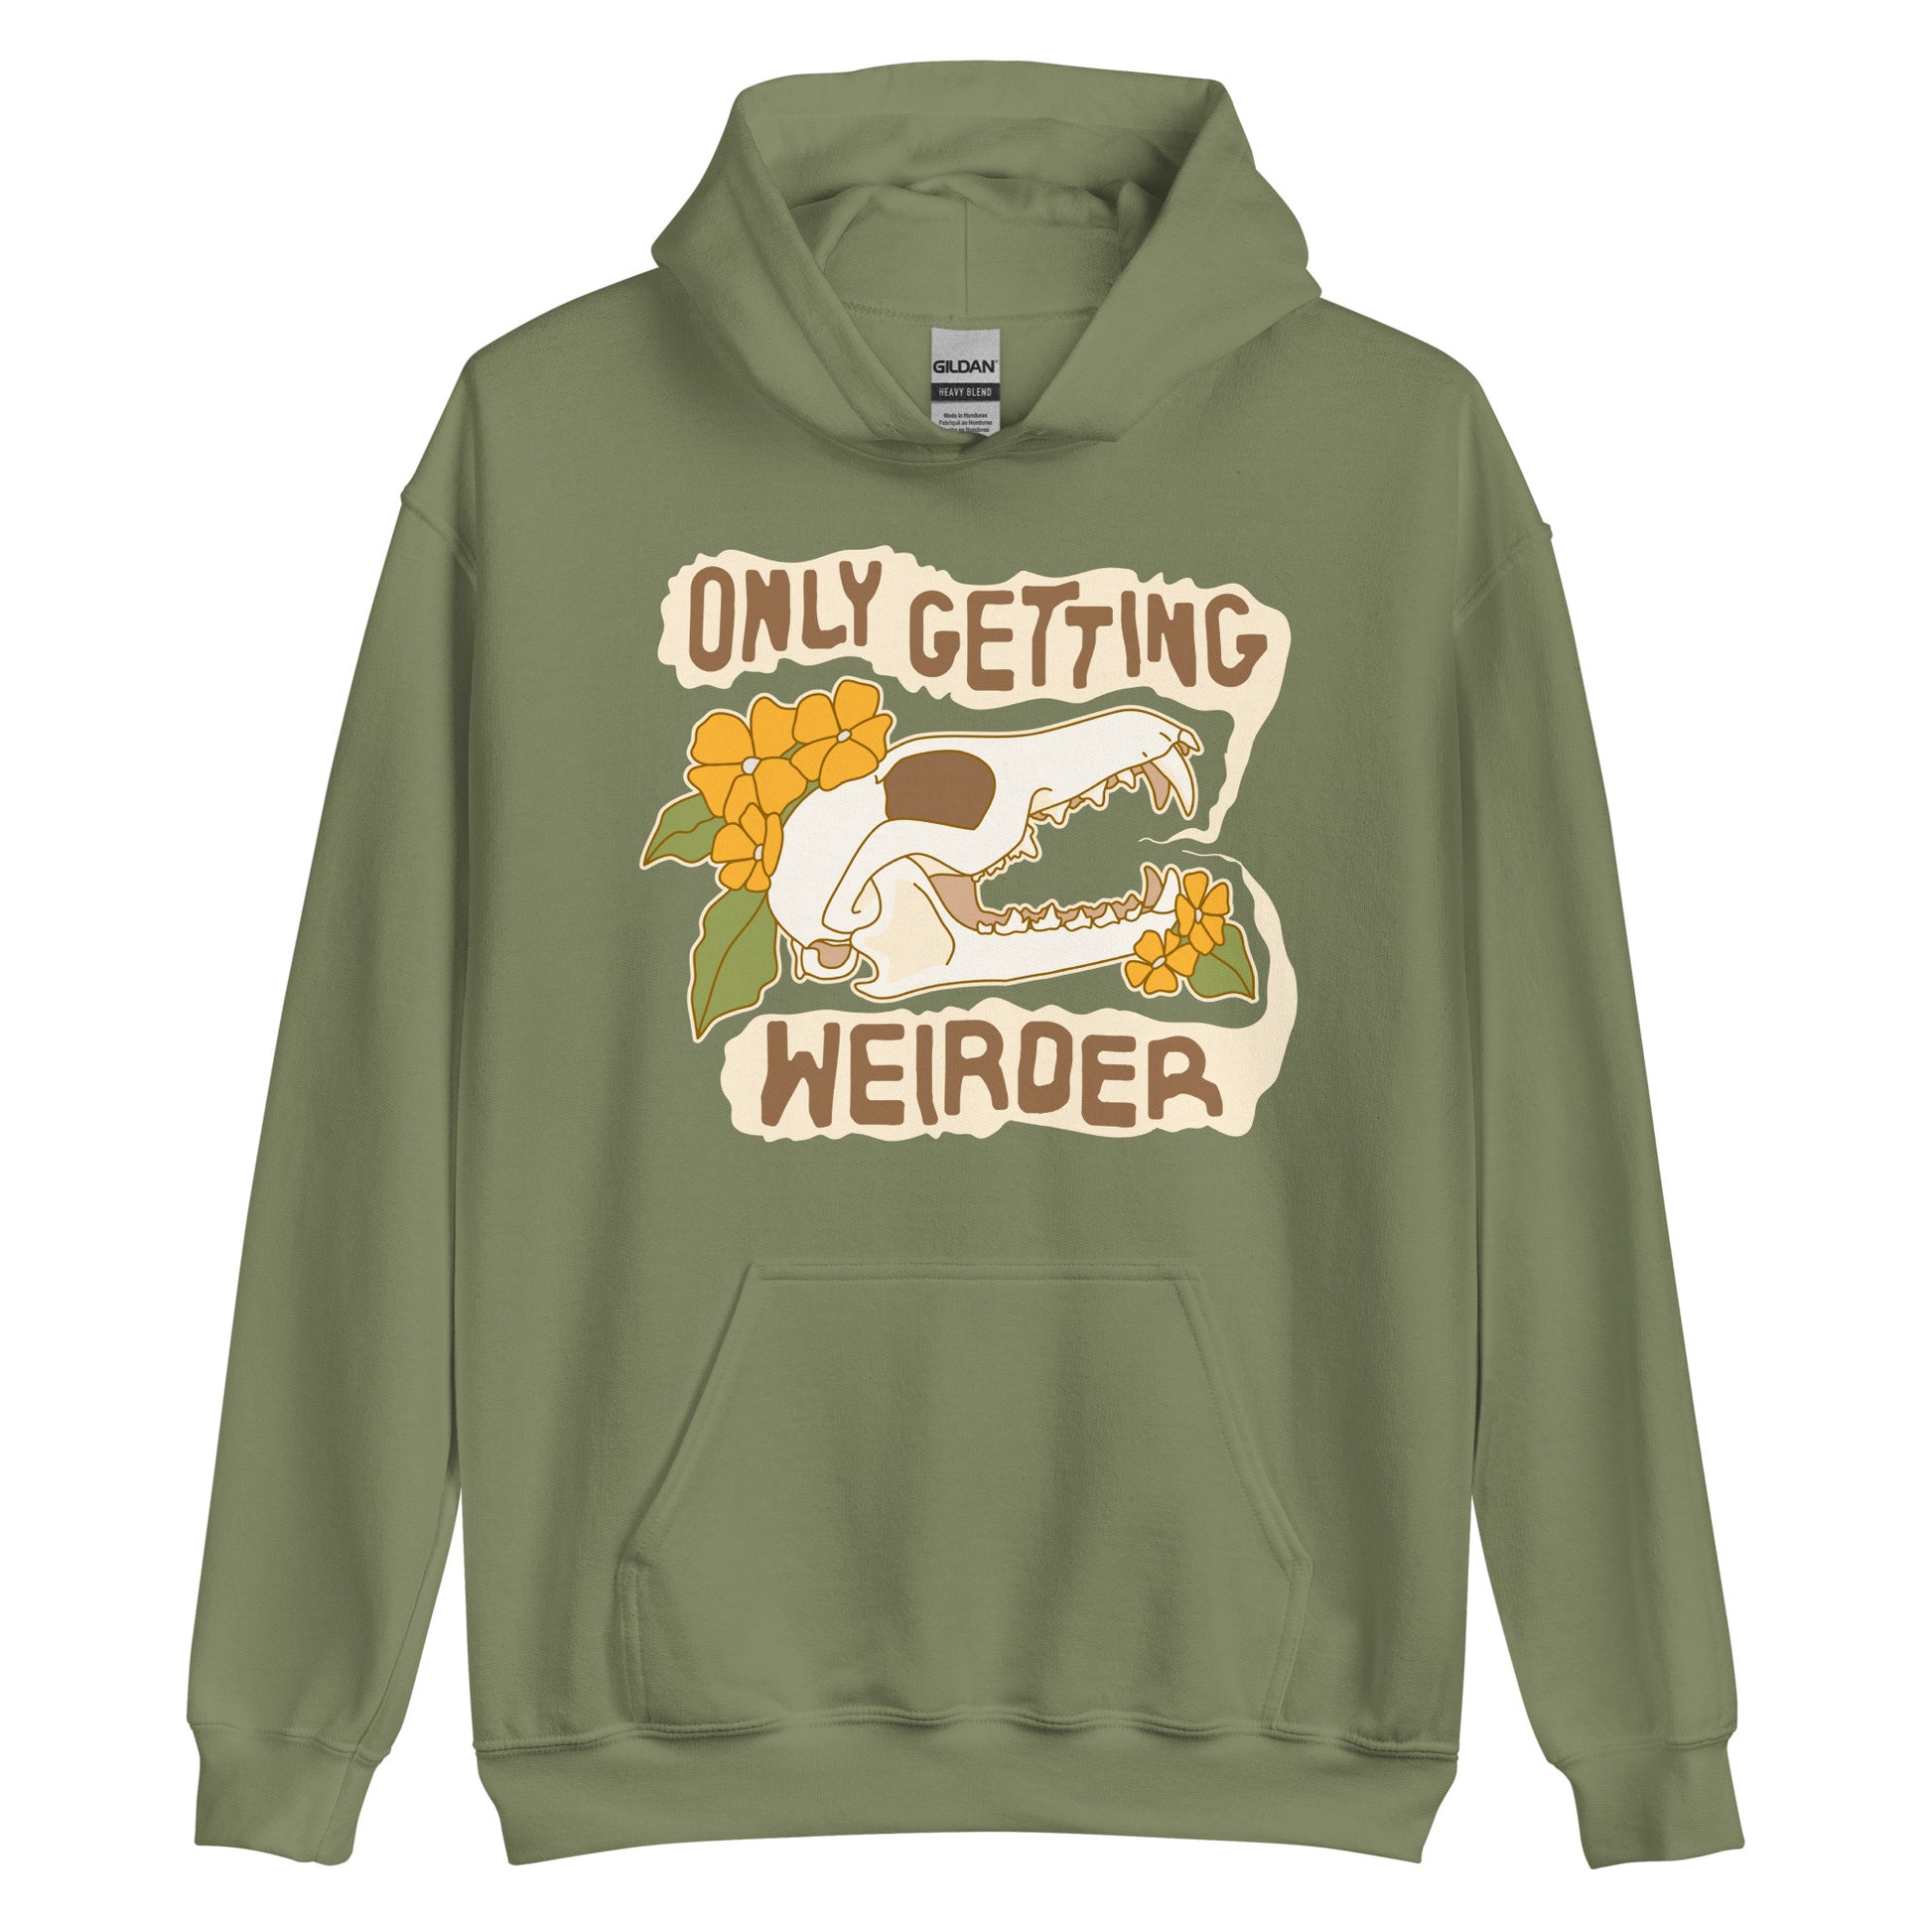 An olive green hooded sweatshirt featuring an illustration of a fox skull surrounded by yellow flowers. Wobbly speech bubbles are coming from the fox's mouth. The text inside the bubbles reads "ONLY GETTING WEIRDER".